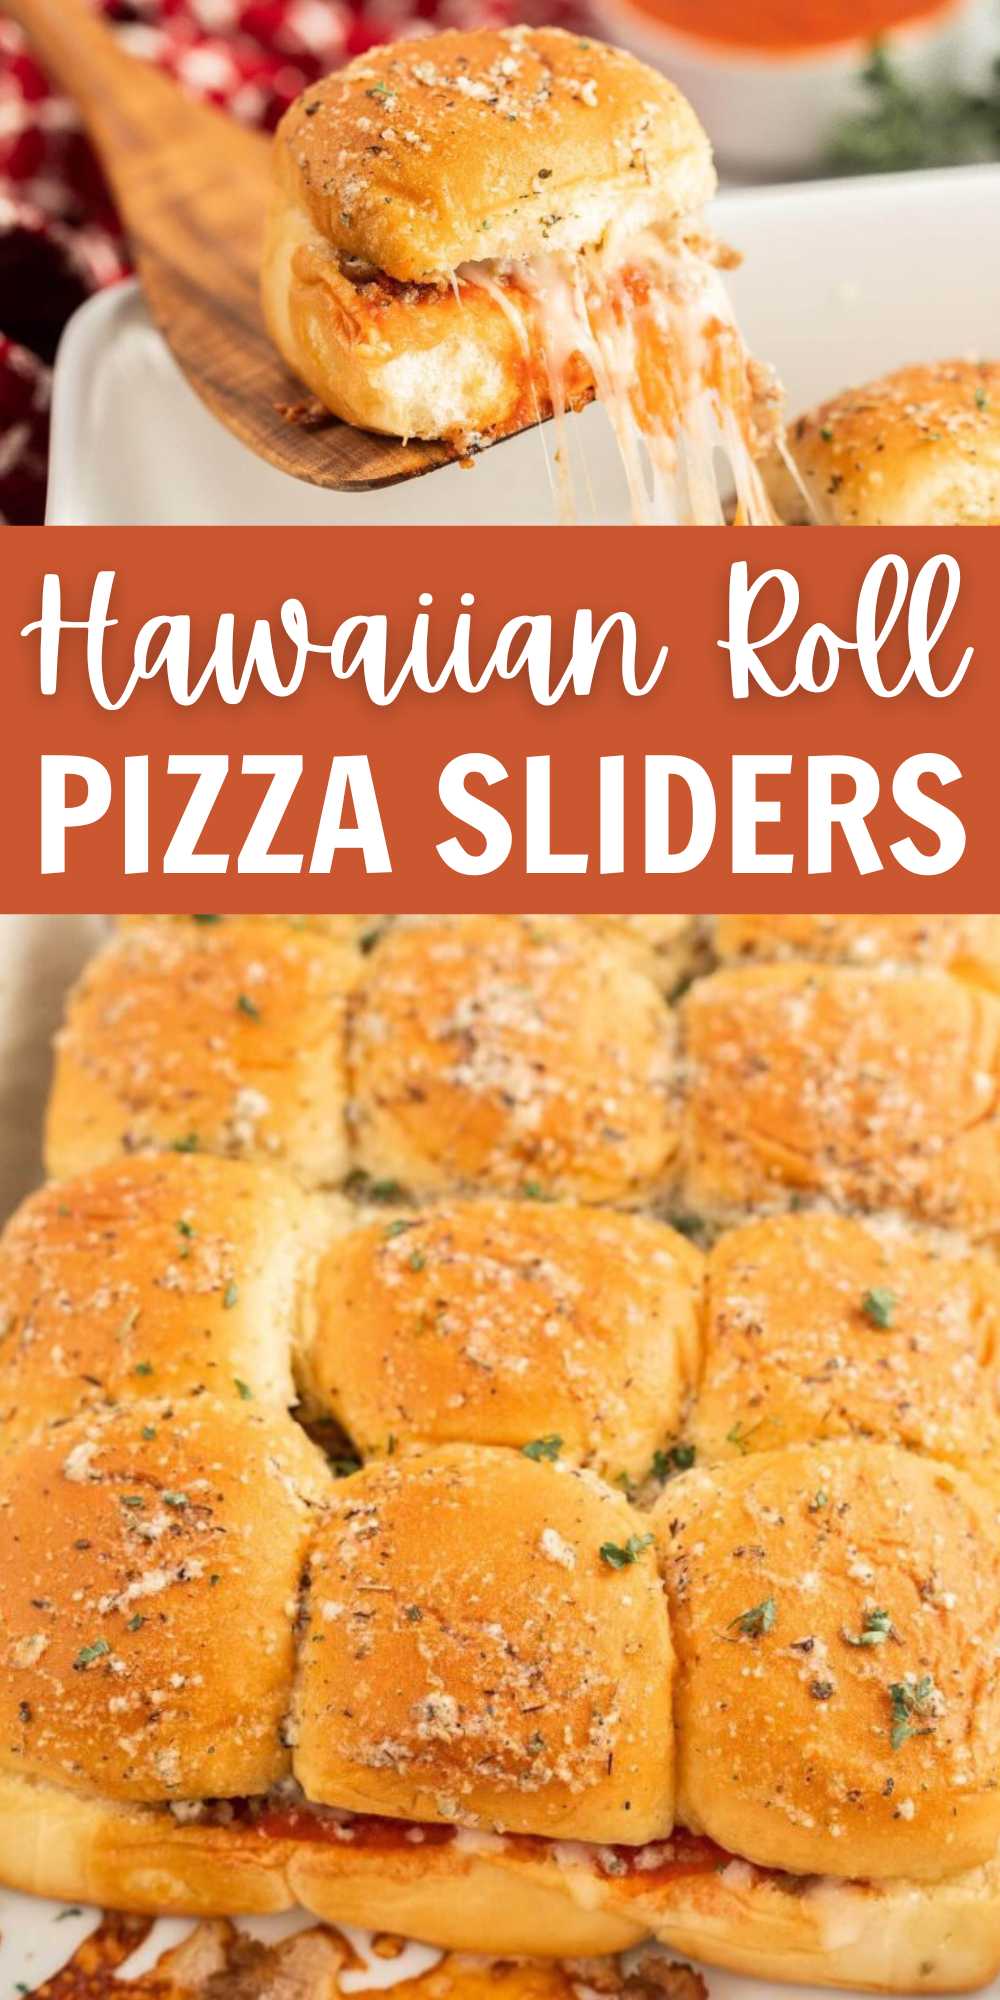 These are the perfect appetizer for game day. Try this fun Hawaiian roll pizza sliders recipe today. Simple ingredients makes these flavorful. If you are looking for an easy appetizer for your game day party, this Hawaiian Roll Pizza Sliders is the one to make.  My family loves when I make these sliders. #eatingonadime #hawaiianrollpizzasliders #pizzasliders 